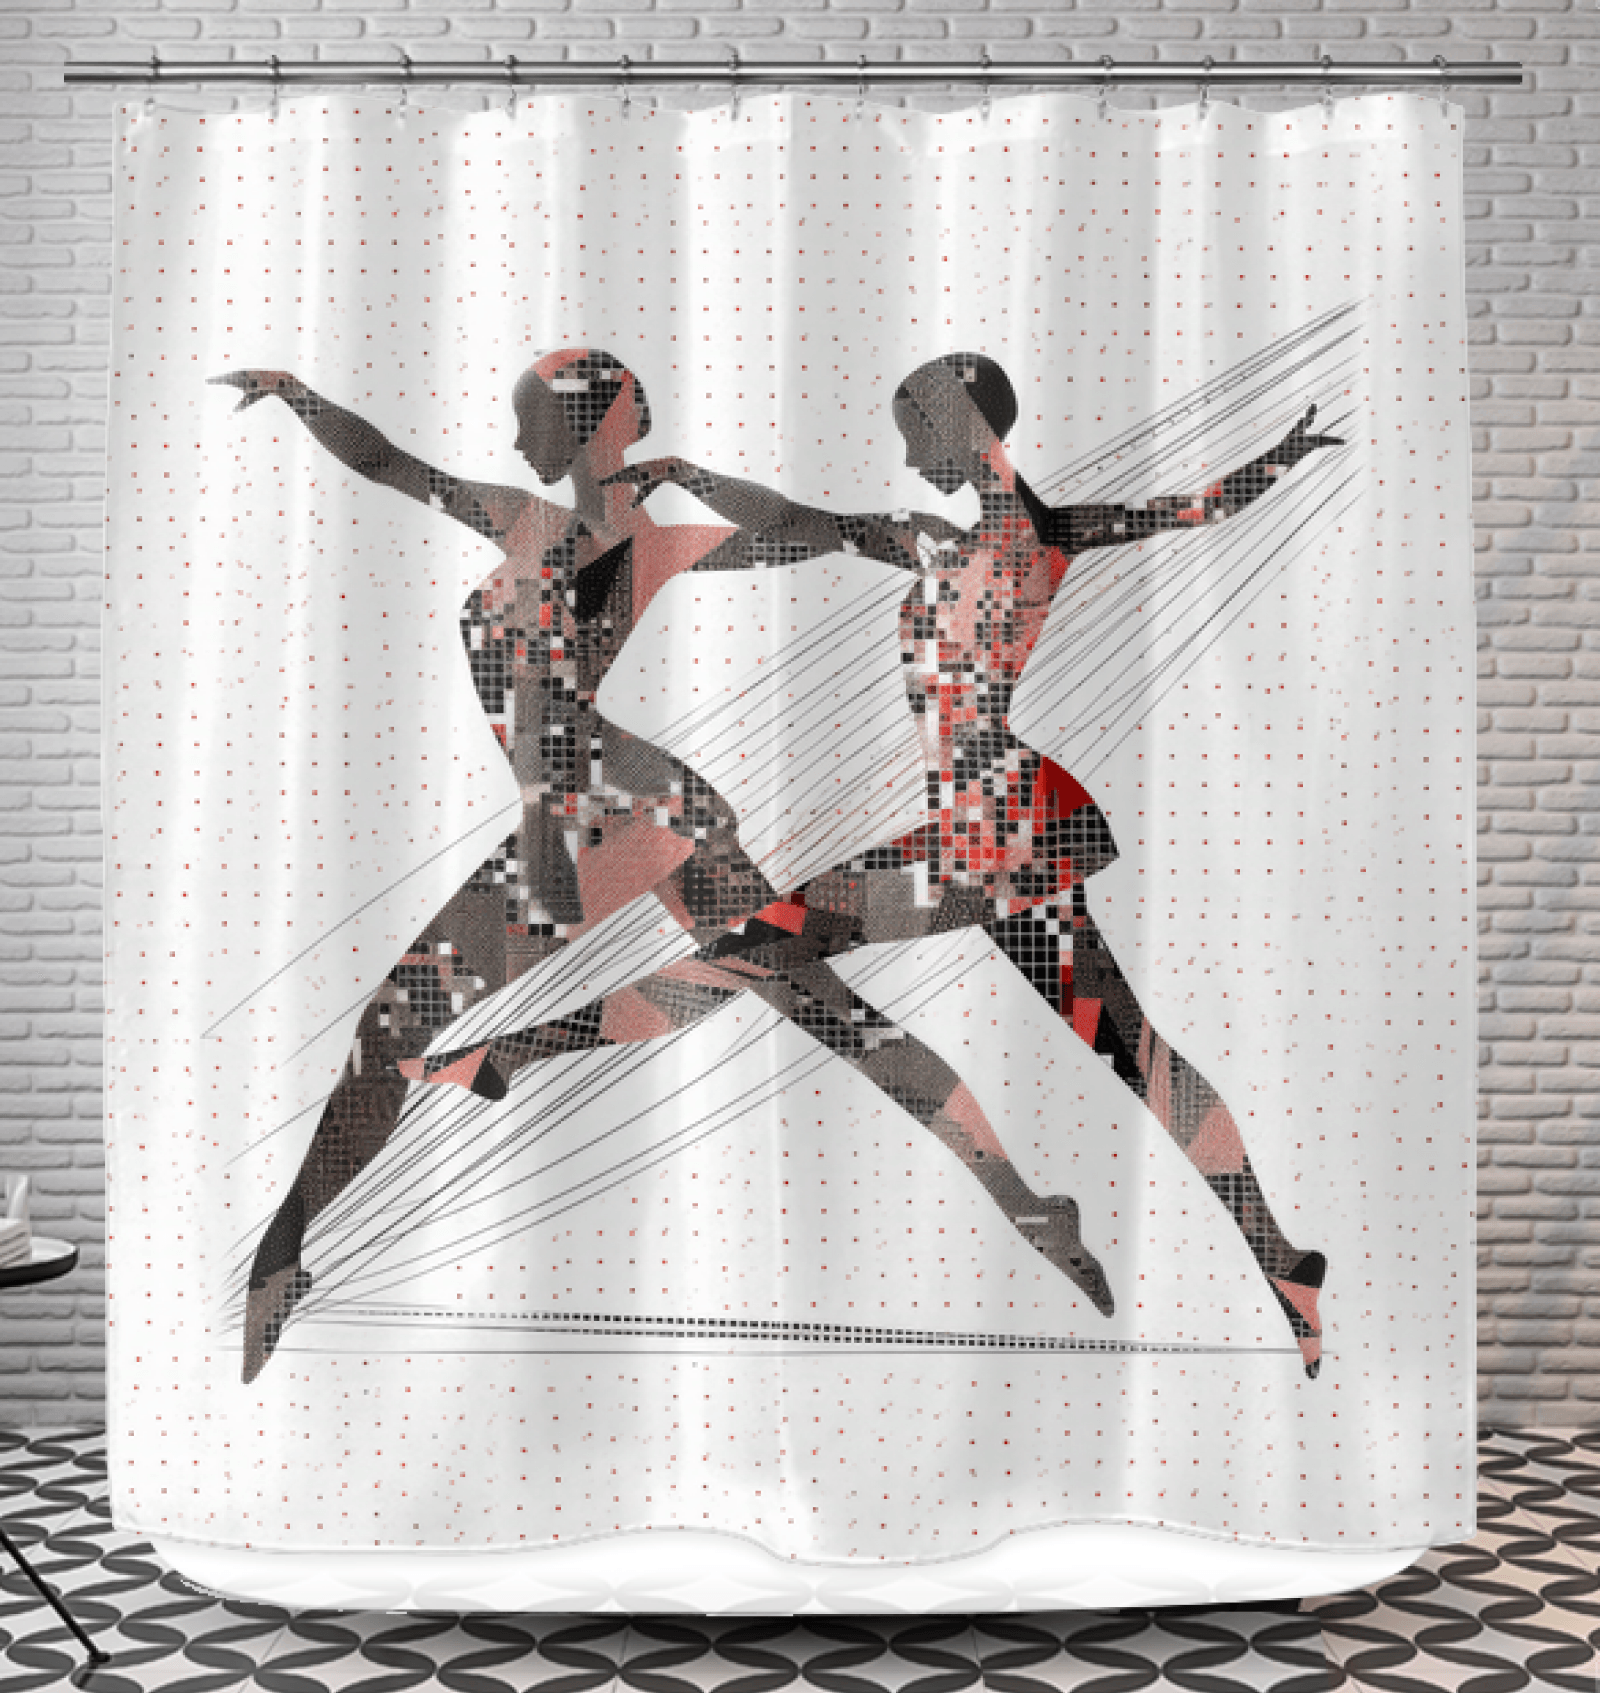 Close-up of Bold Women's Dance Expression Shower Curtain with vivid colors and dynamic dance poses.